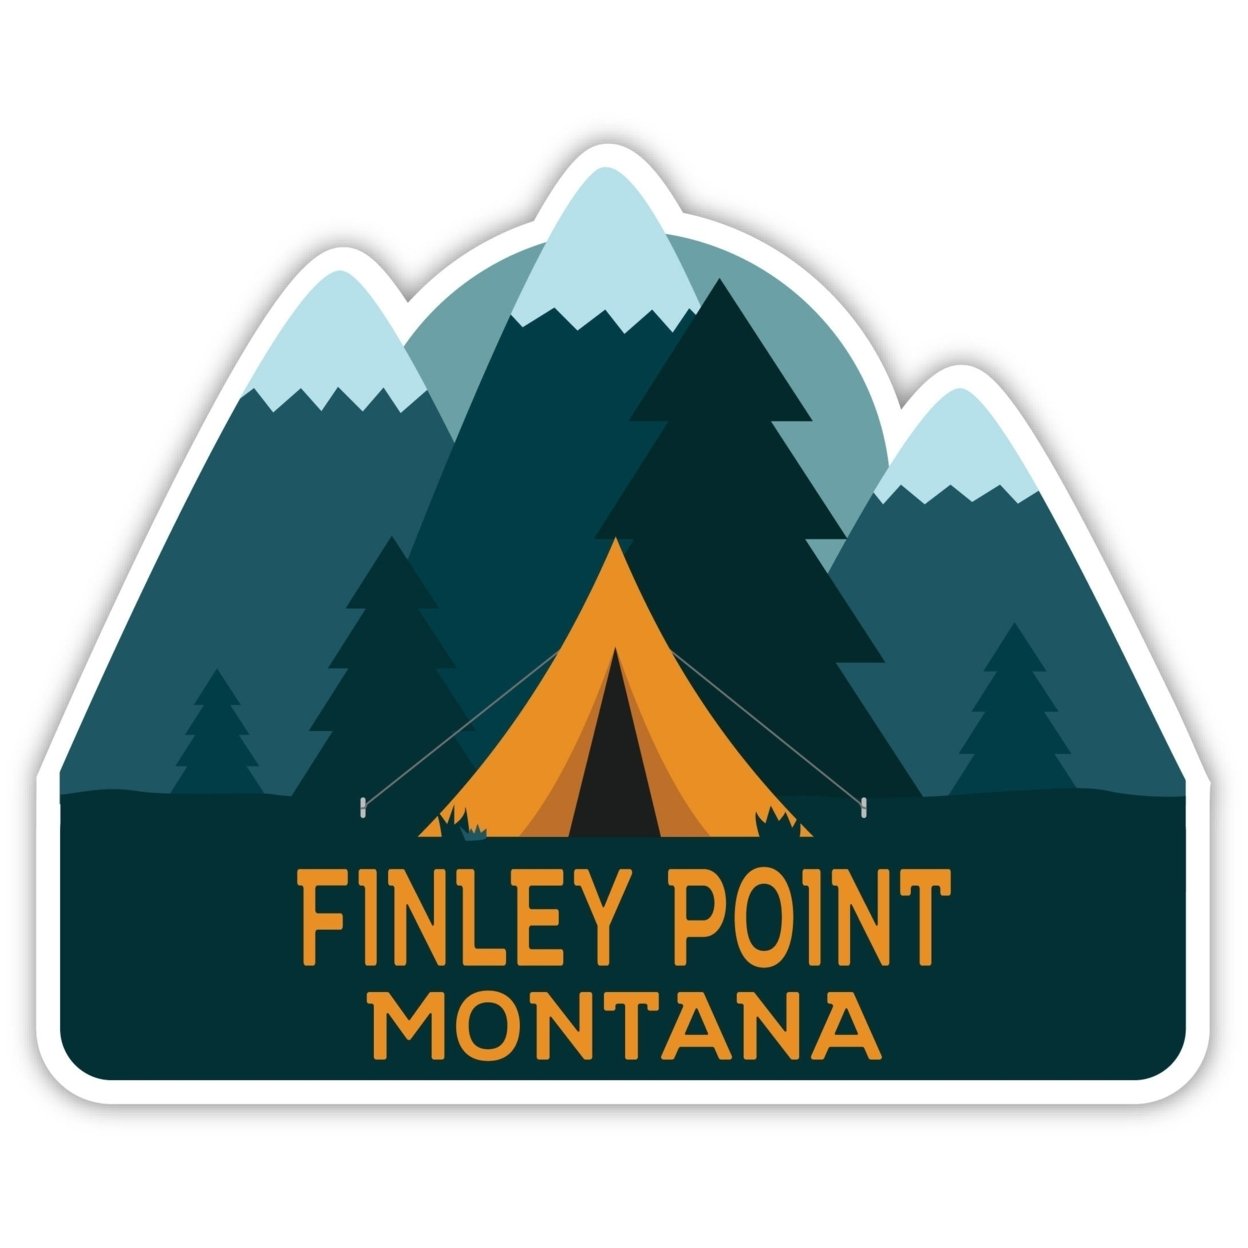 Finley Point Montana Souvenir Decorative Stickers (Choose Theme And Size) - 4-Pack, 8-Inch, Tent